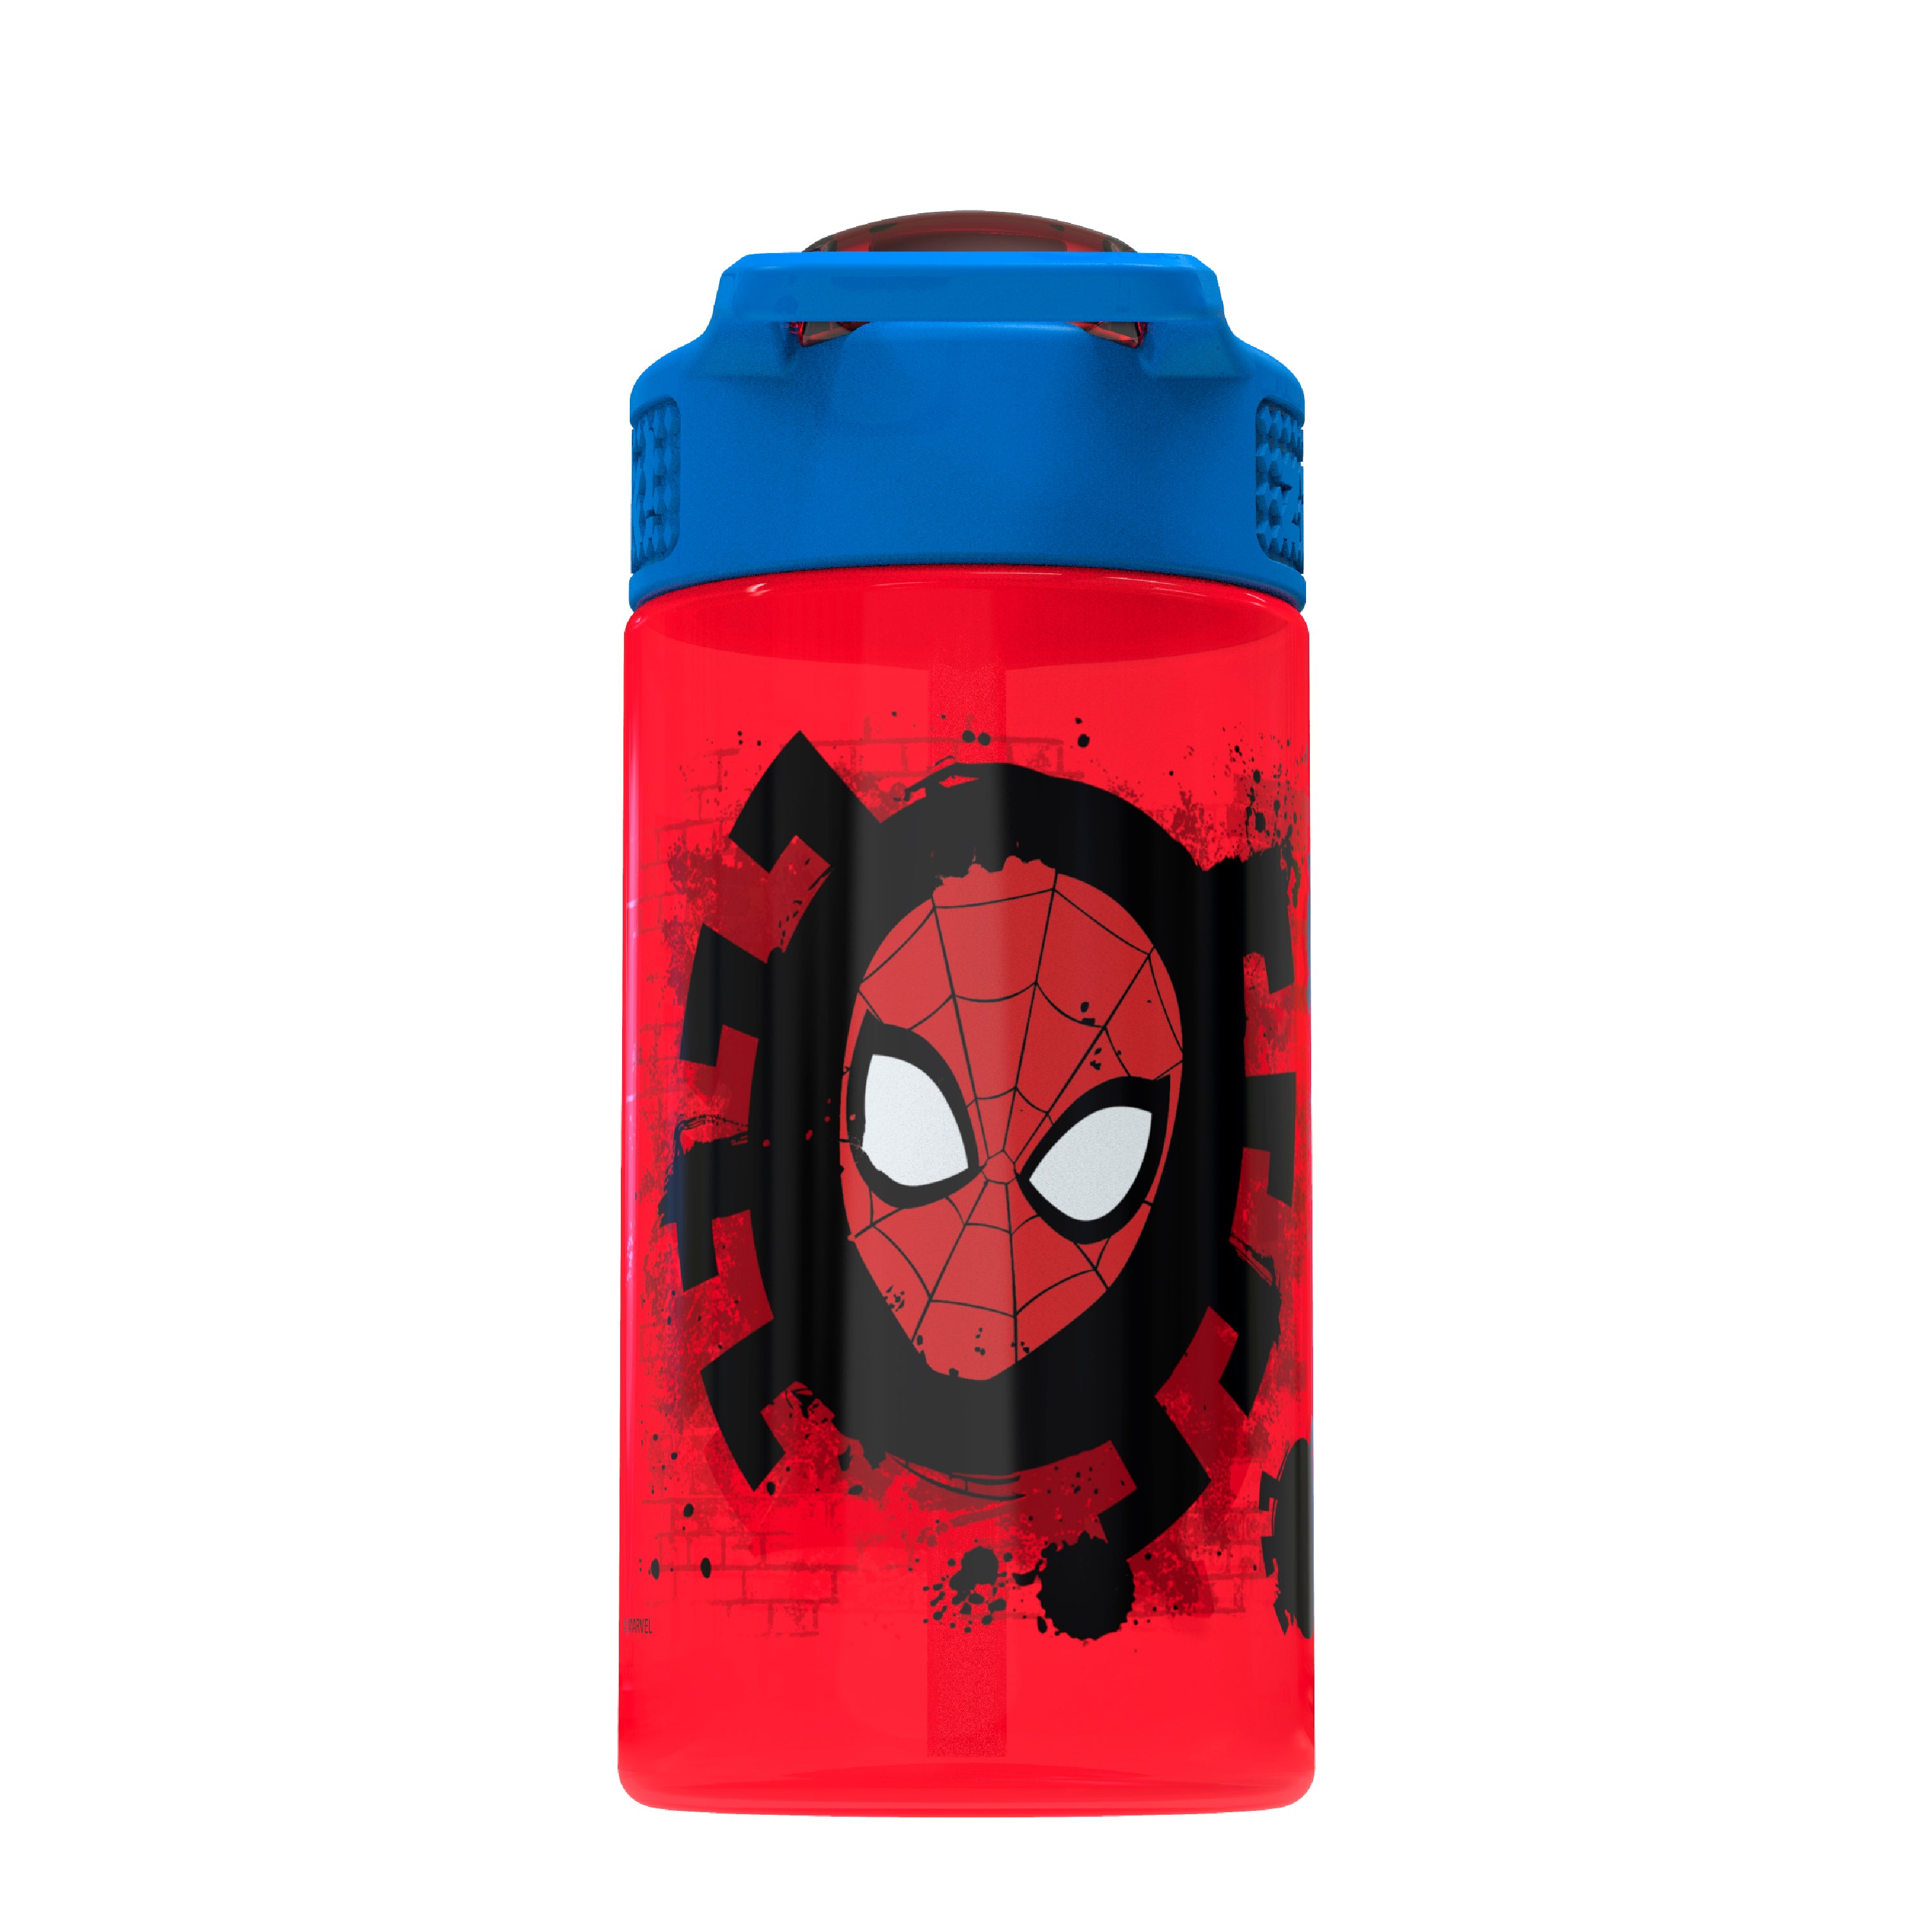 Spider Man Kids Plastic Water Bottle with Leak Proof Lid and Spout - 16 ounce